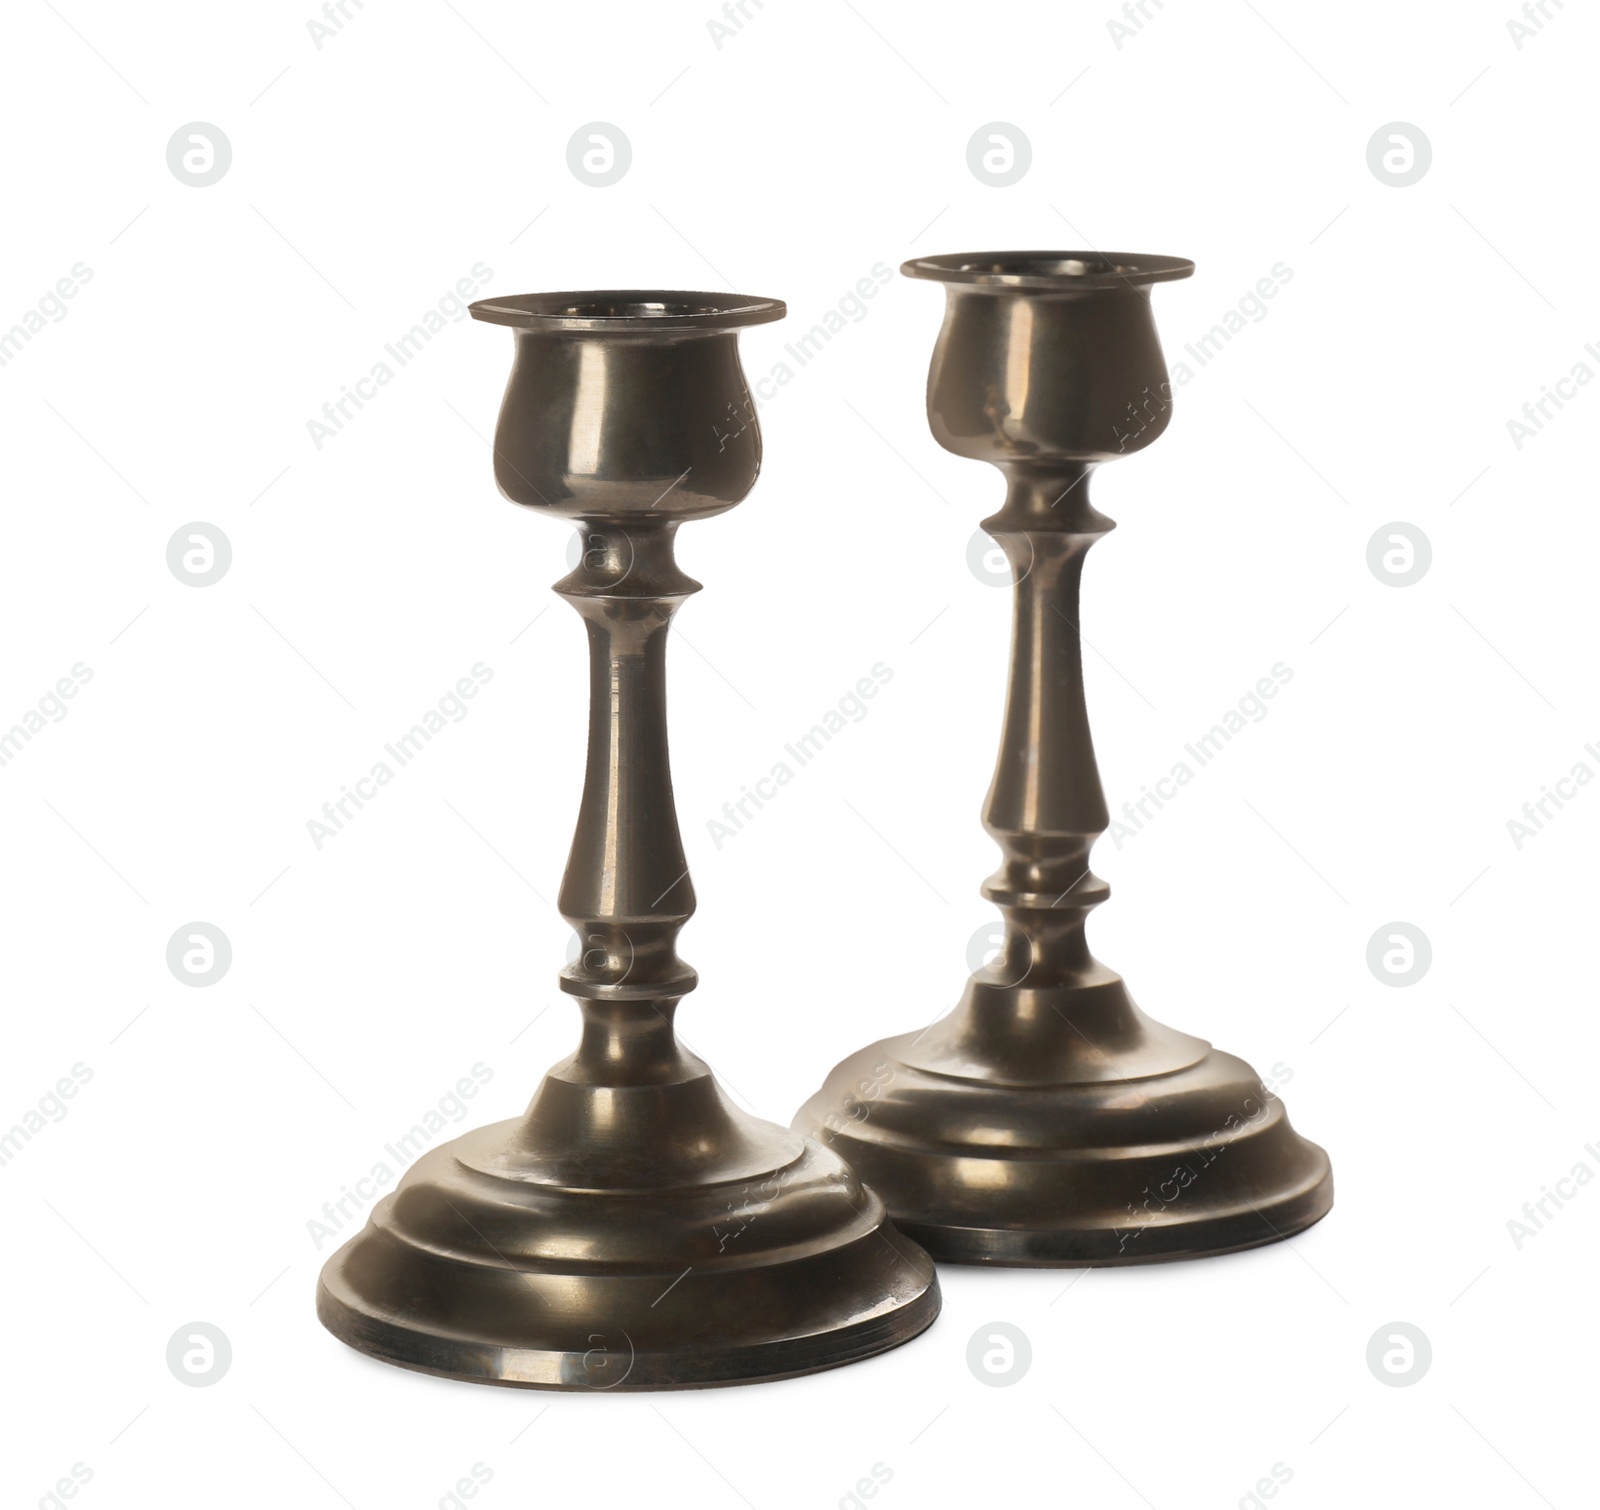 Photo of Two vintage metal candlesticks on white background